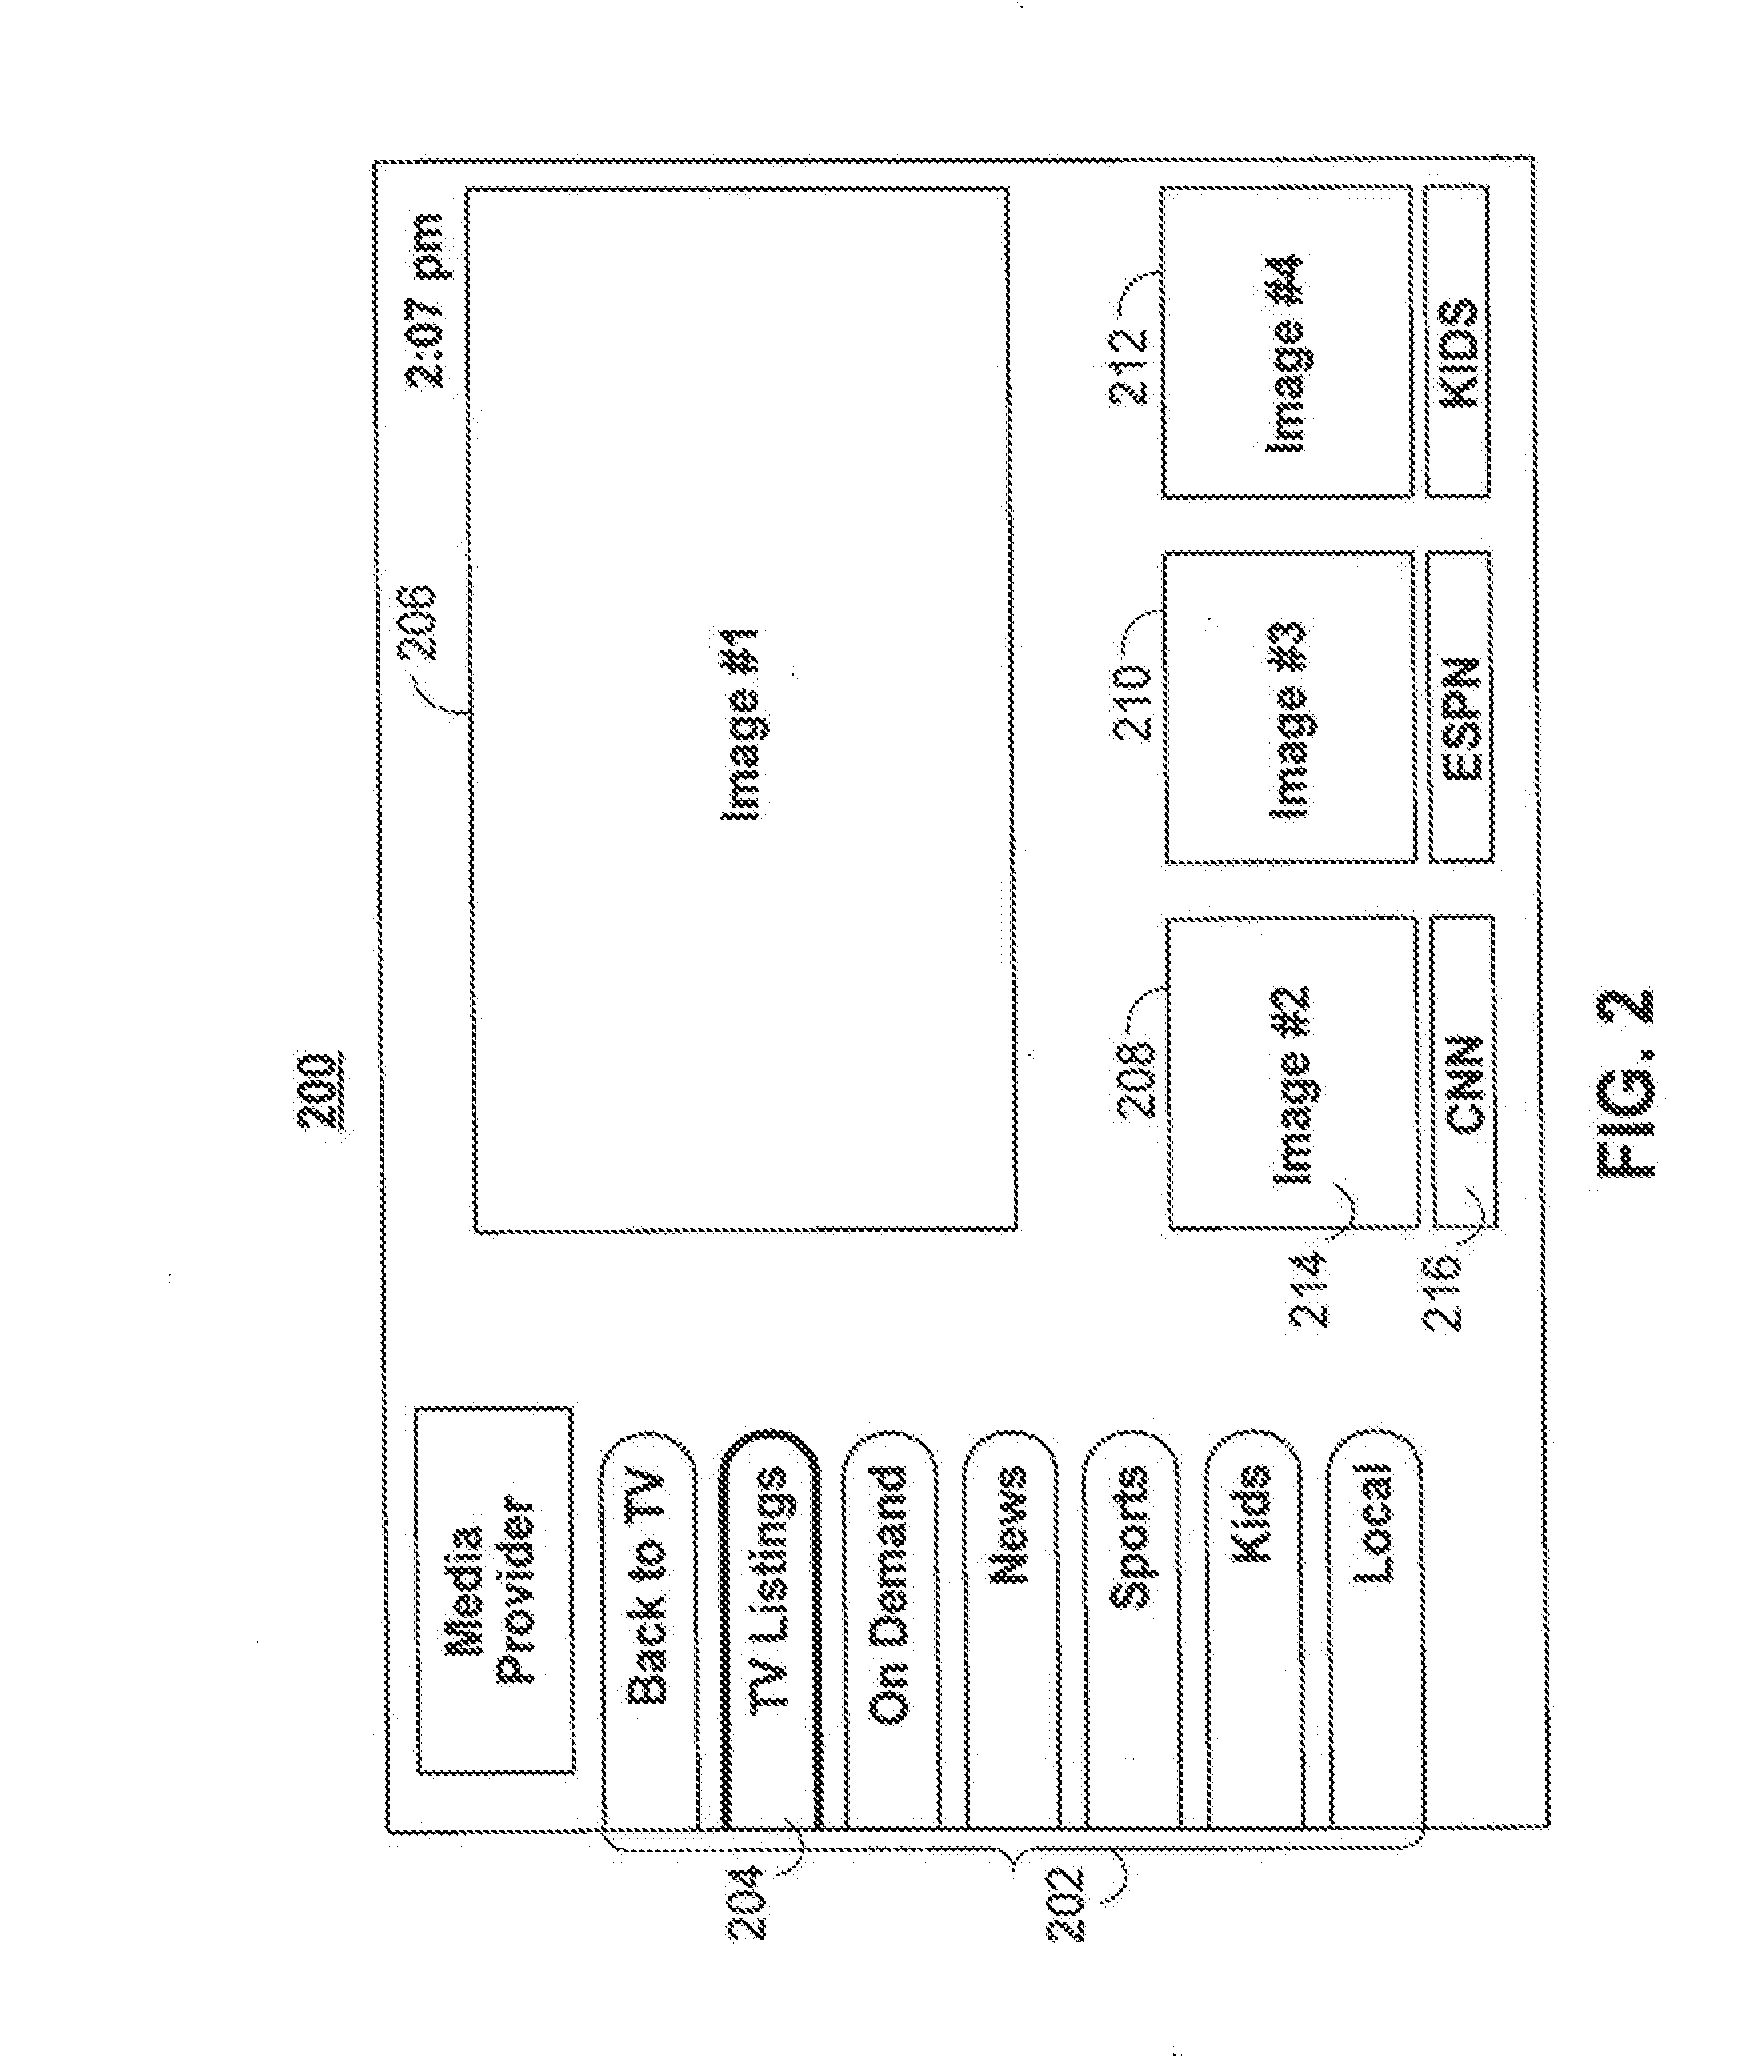 Systems and methods for providing remote access to interactive media guidance applications